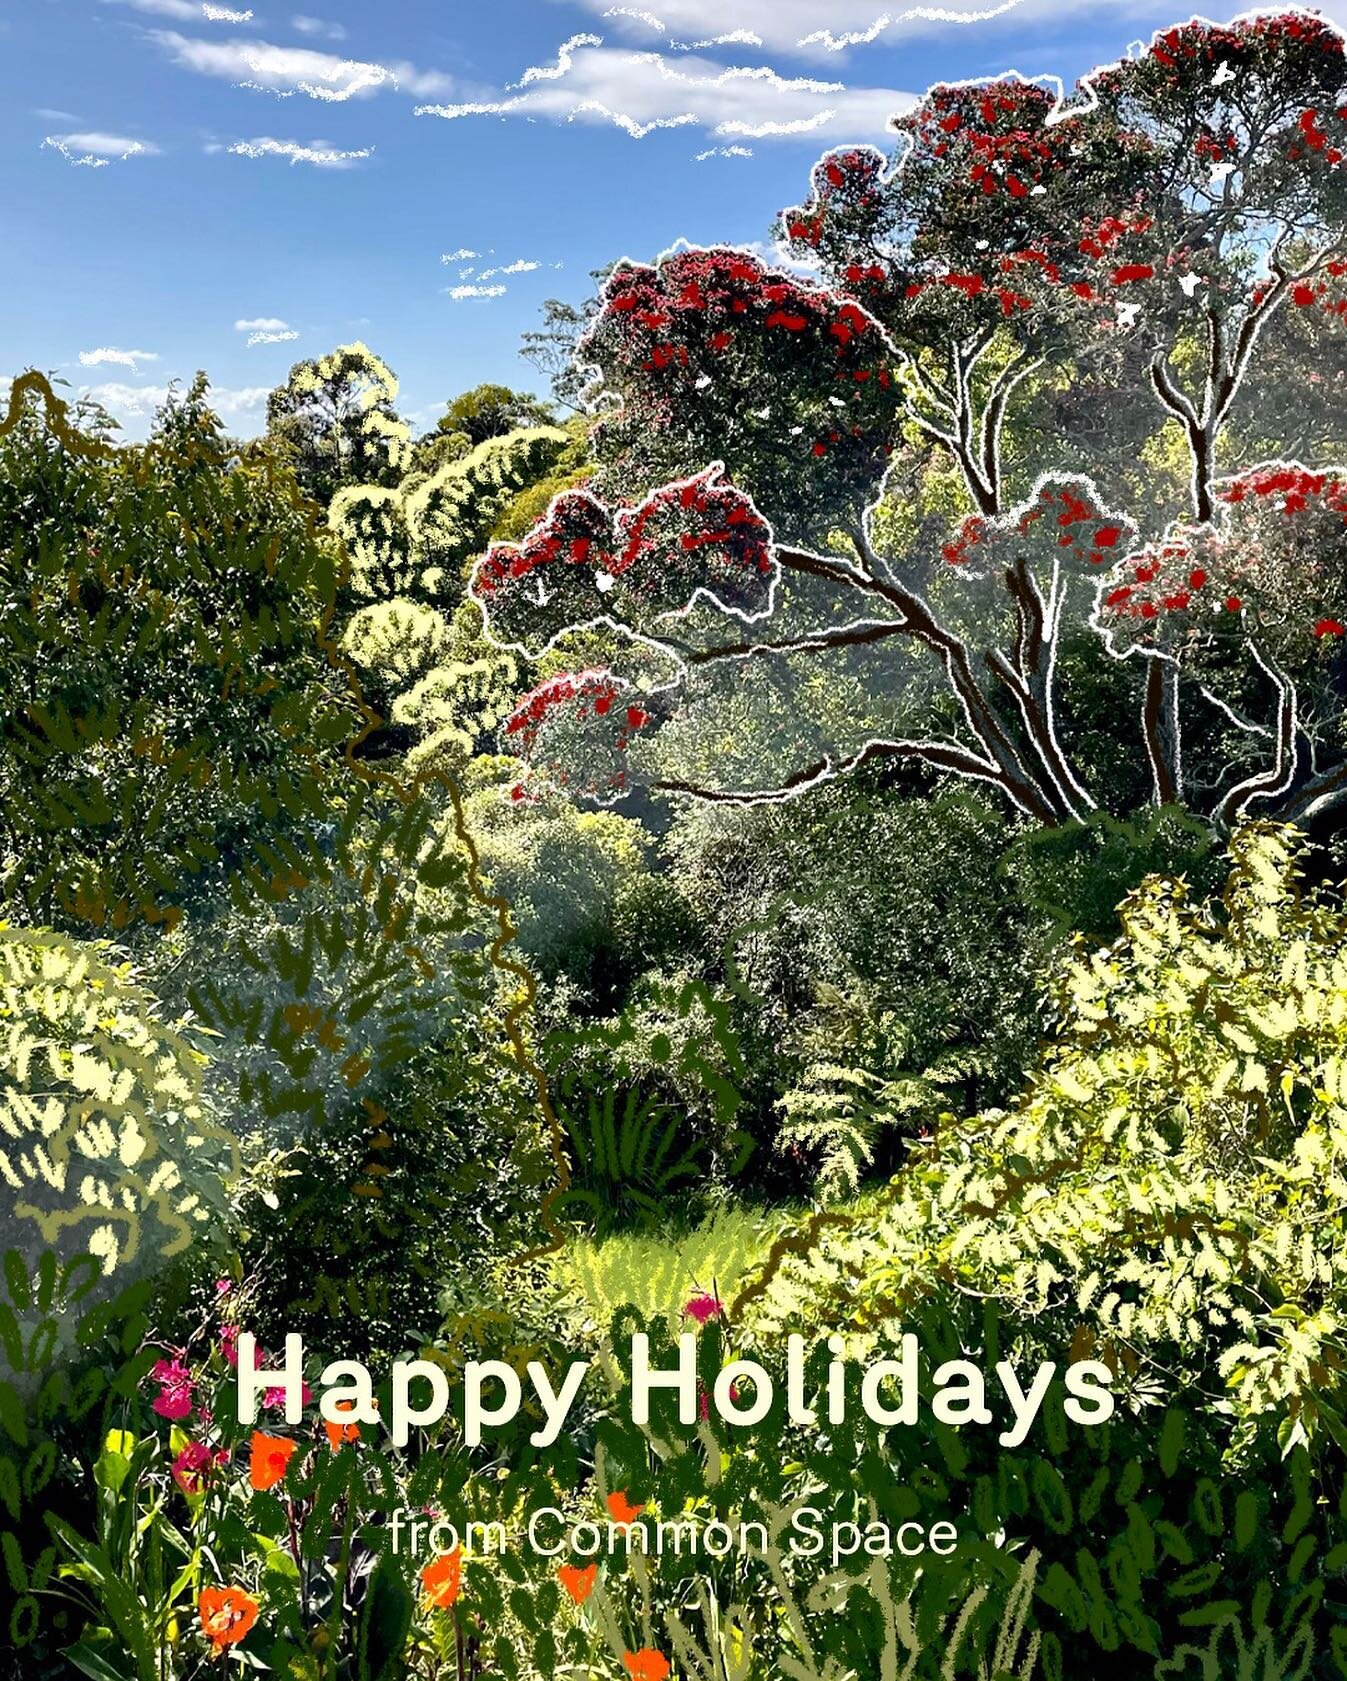 Happy holidays from Common Space! 

A view of our local Pohutukawa/Christmas tree in bloom. Thank you for all the support this year and we hope you enjoy the summer with friends and family.